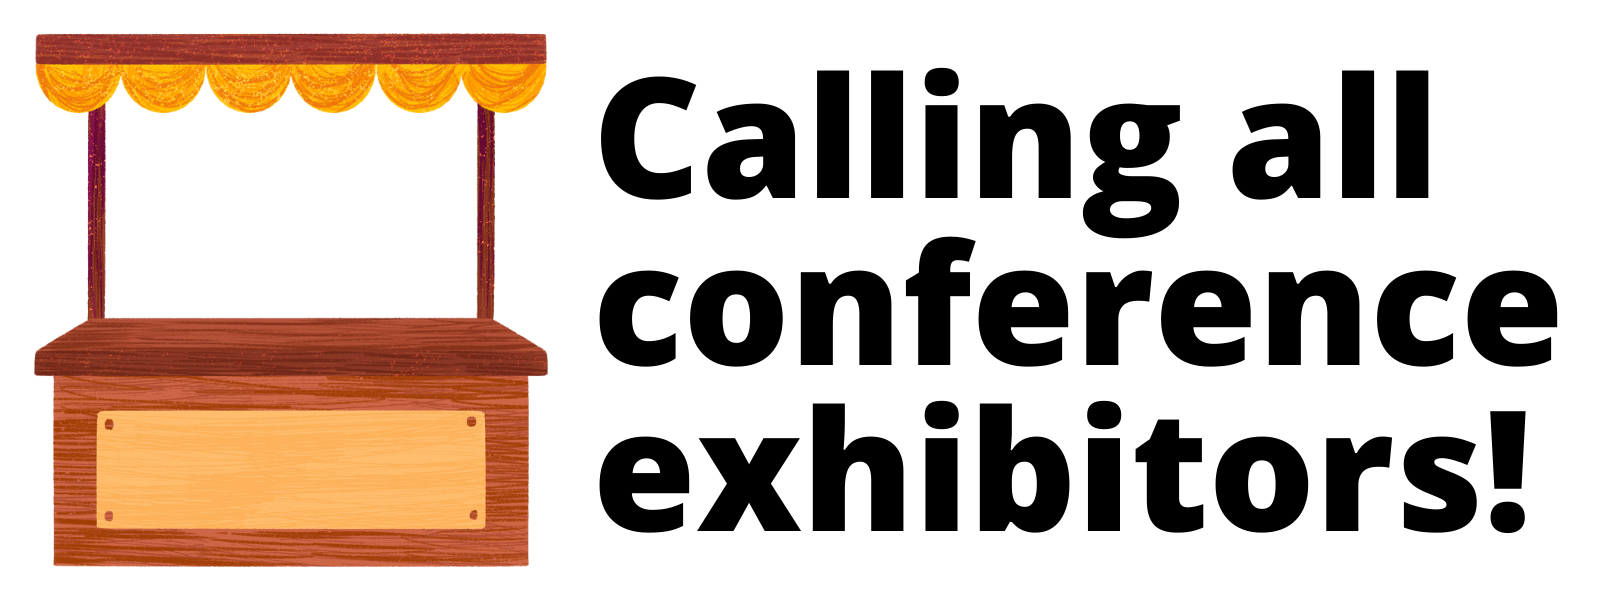 Image of booth; Calling all conference exhibitors!